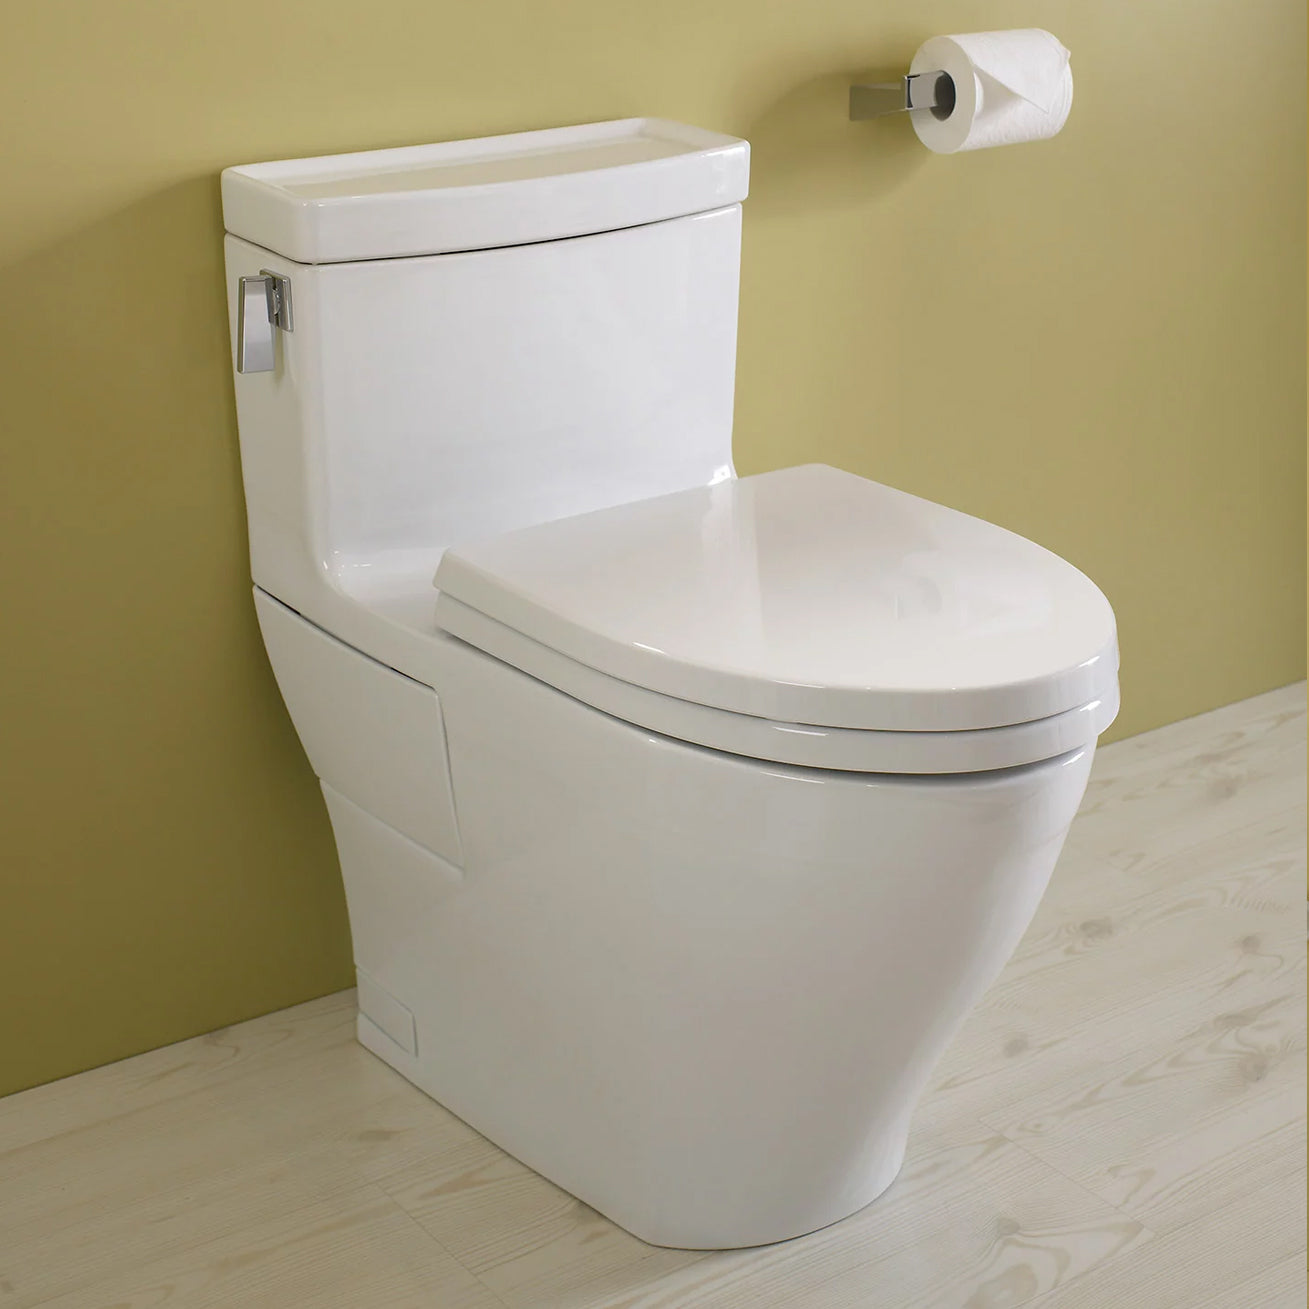 MS624124CEFG#01 - Legato One-Piece Elongated Universal Height Skirted Toilet - 1.28 GPF - Cotton White